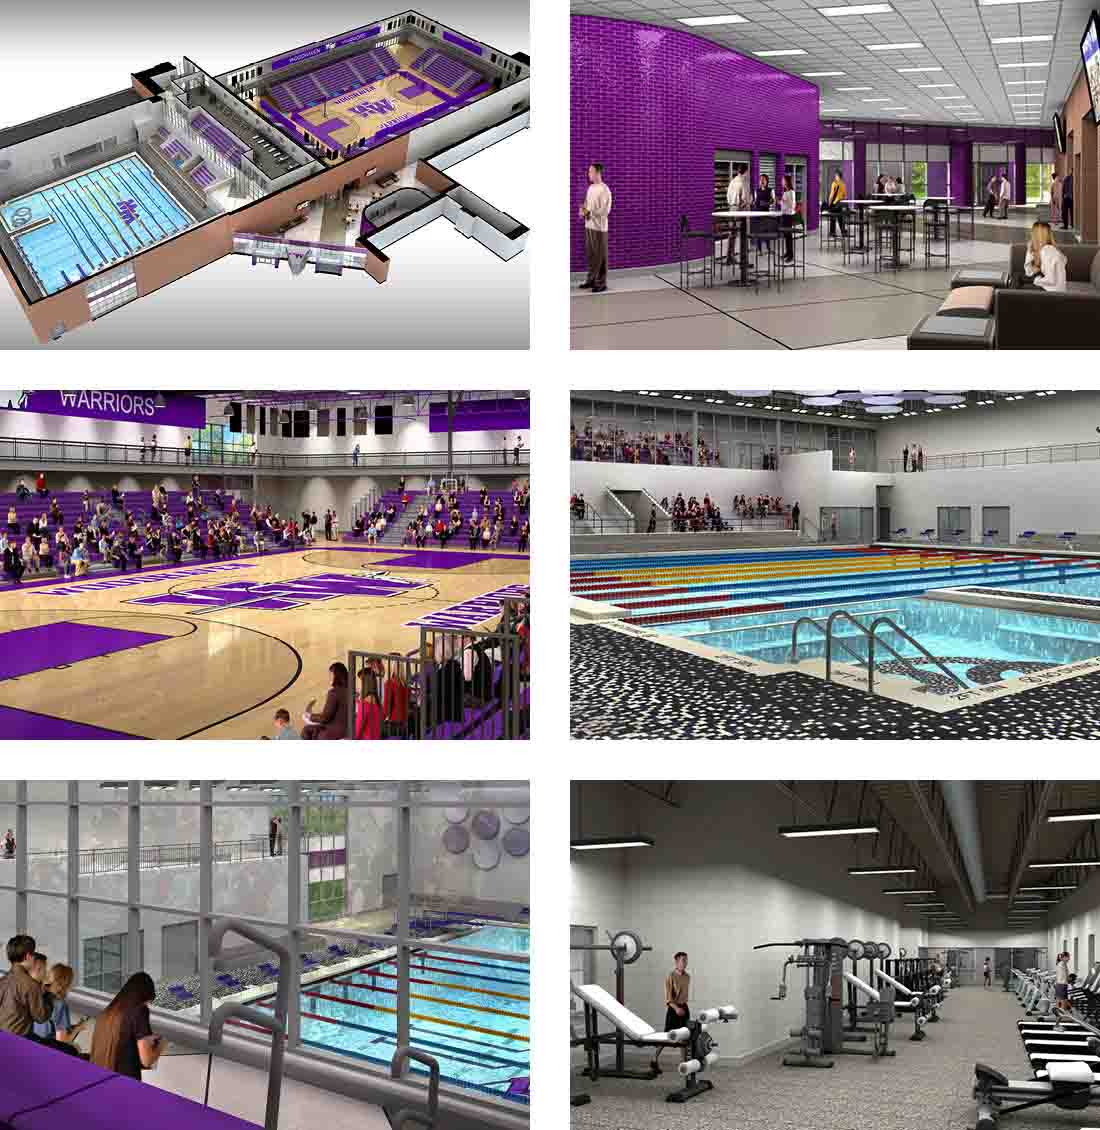 Woodhaven High School, part of Woodhaven-Brownstown School District, renderings for athletic center and pool